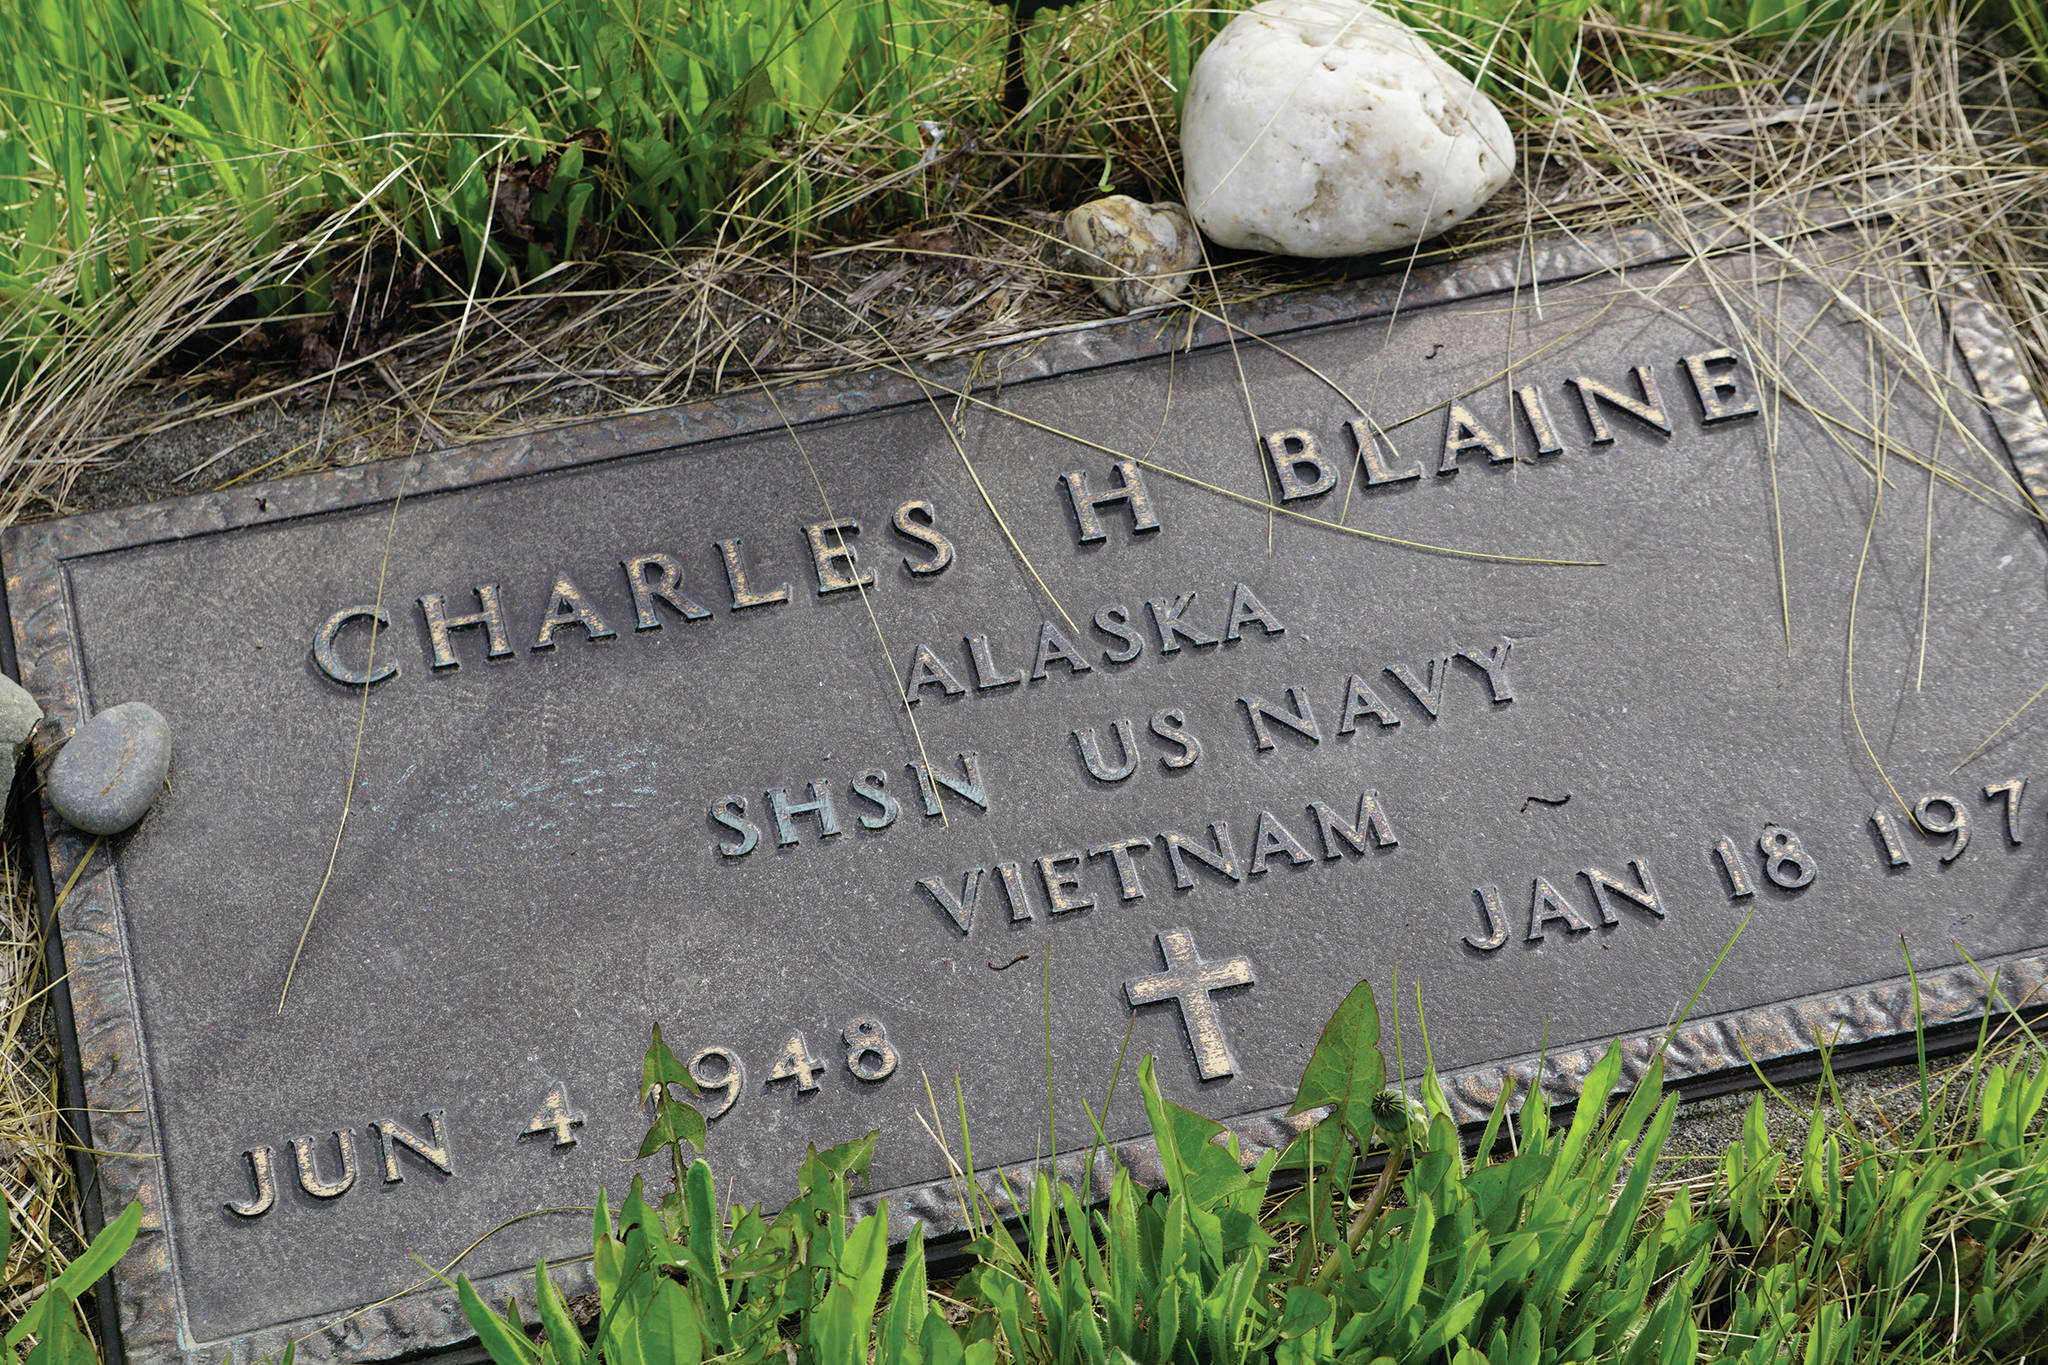 Vietnam War veteran Charles Blaine’s grave is one of many veterans who are buried in the Hickerson Memorial Cemetery on Diamond Ridge near Homer, Alaska. Memorial Day observances were held at the cemetery on Monday, May 25, 2020. (Photo by Michael Armstrong/Homer News)